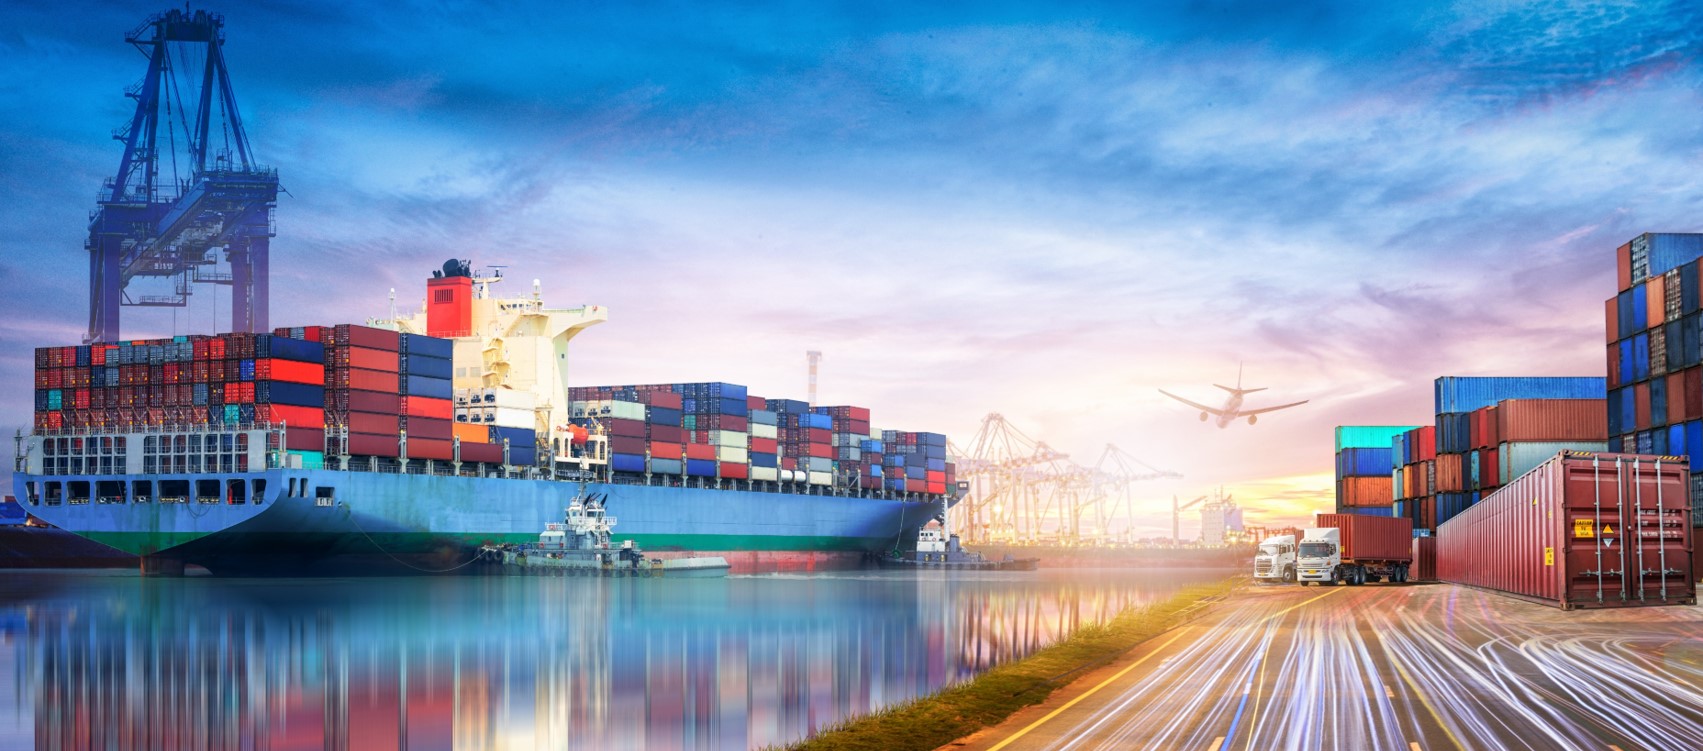 Shipping industry is set for a growth year but 2021 has multiple risks to navigate